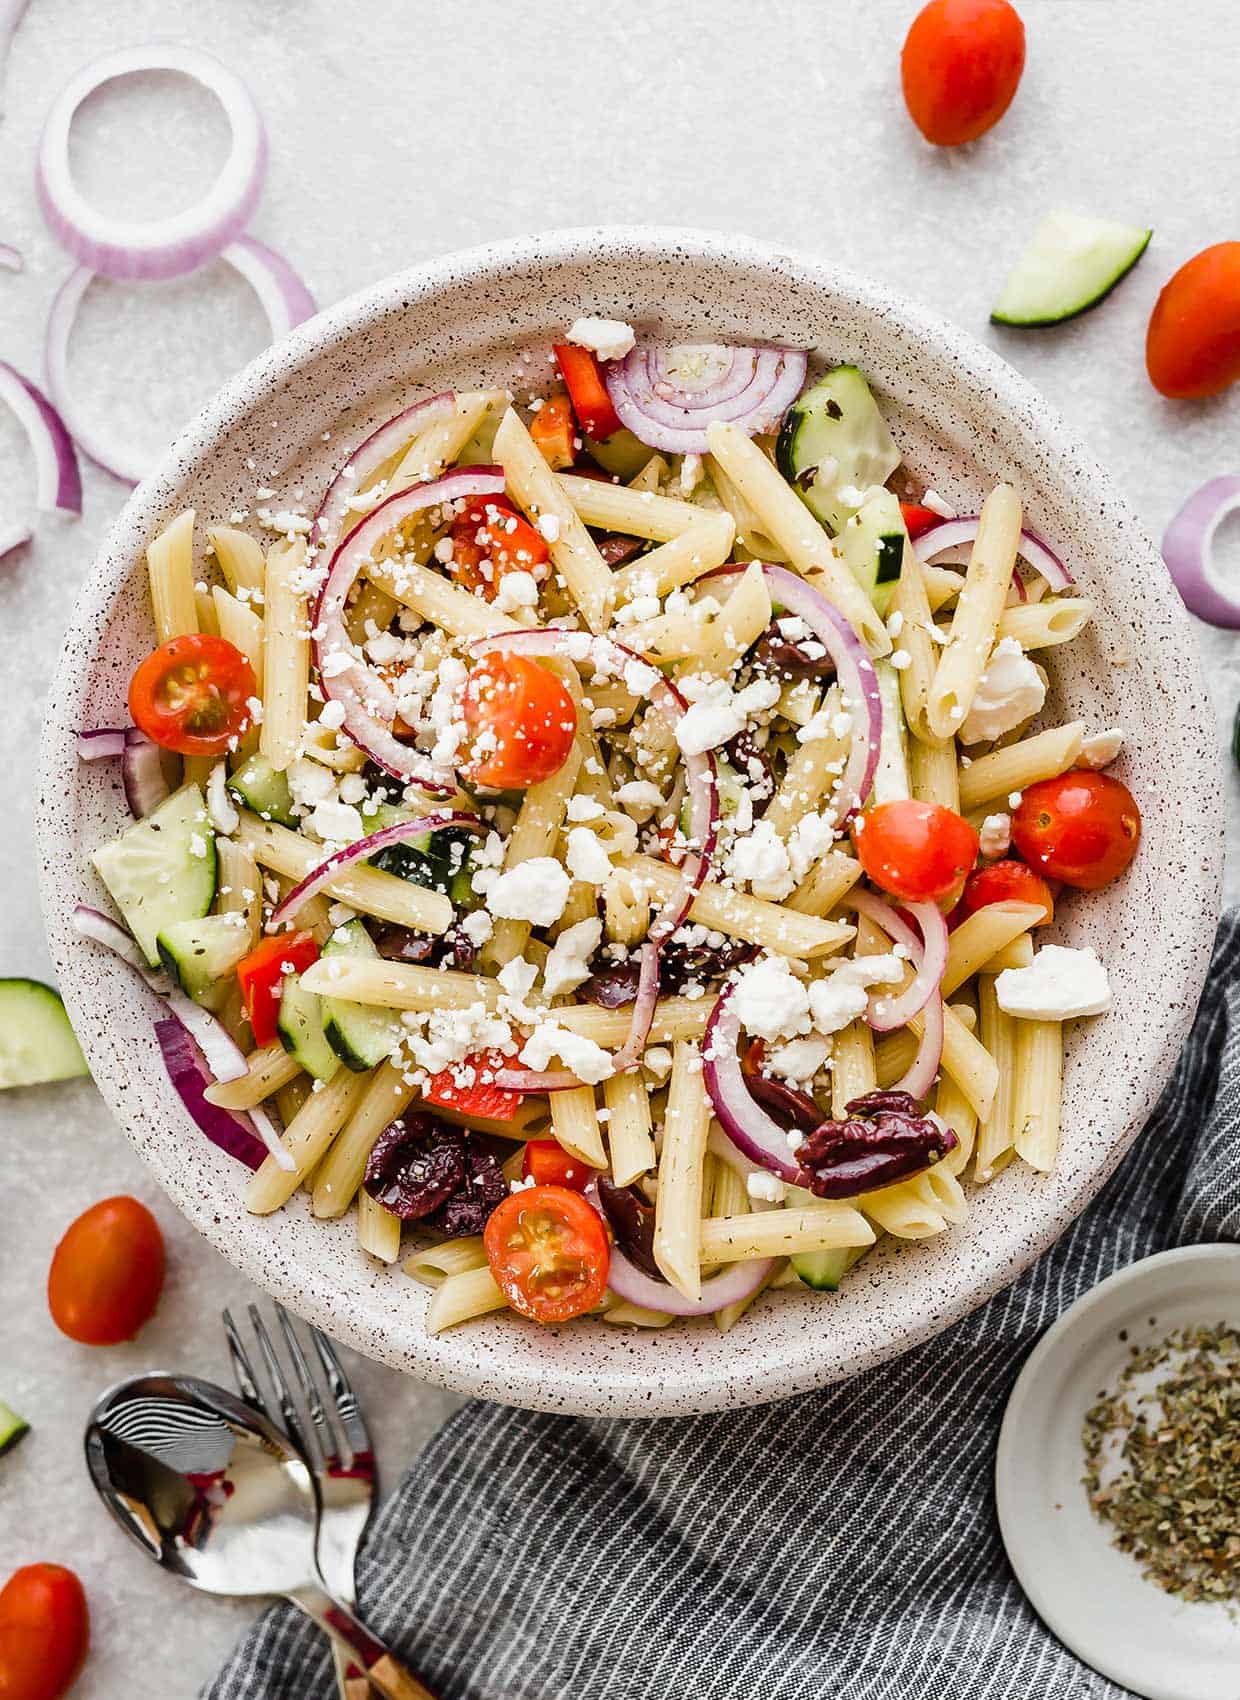 Greek pasta salad with penne pasta in a white bowl with tomatoes and red onion surrounding the bowl.